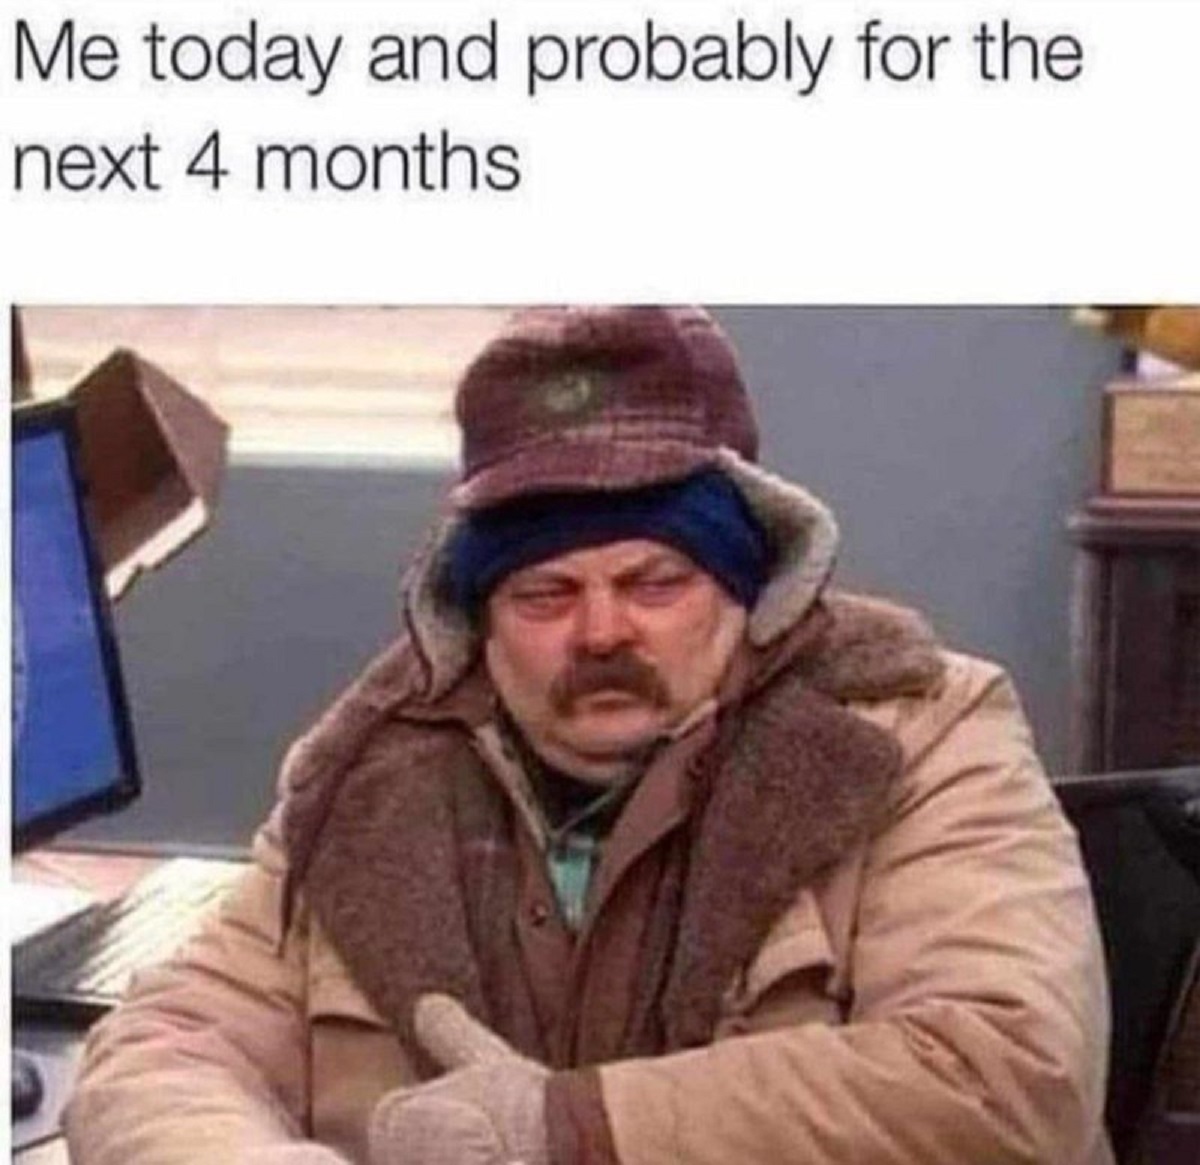 me today and probably for the next 4 months - Me today and probably for the next 4 months